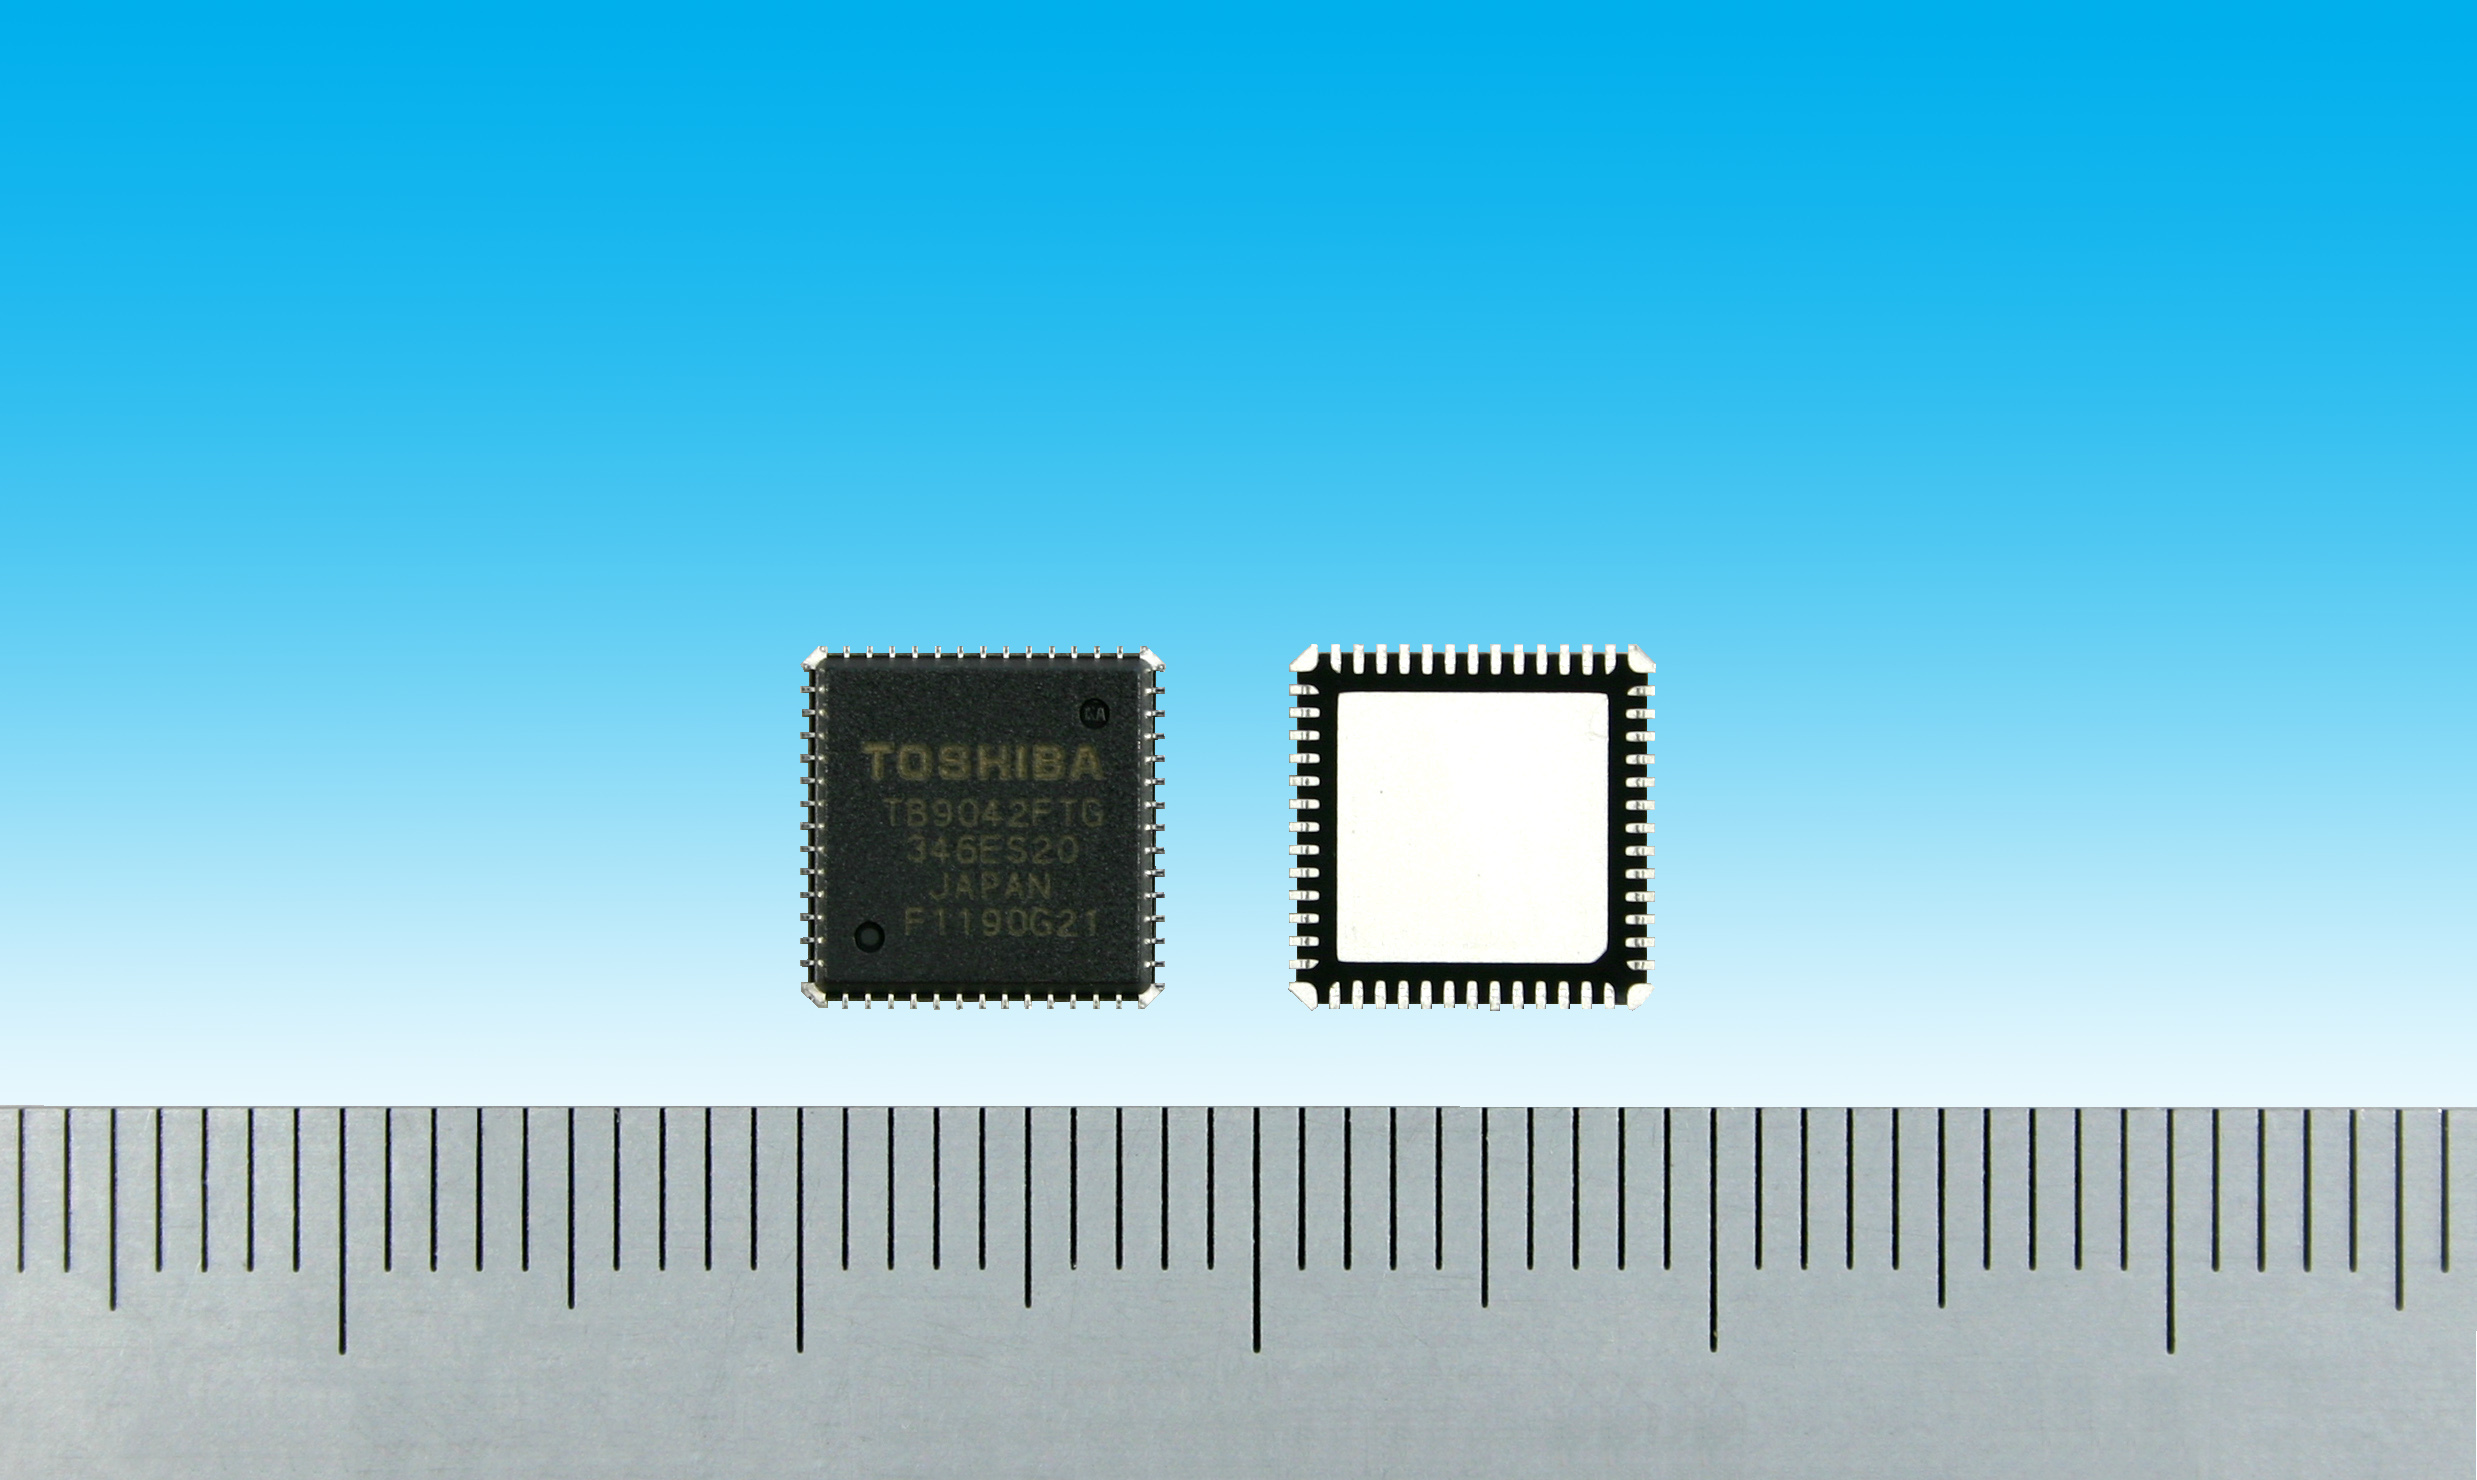 Hybrid And Electric Transports Will Be Safer With Toshiba’s IC And MCU Mass Productions